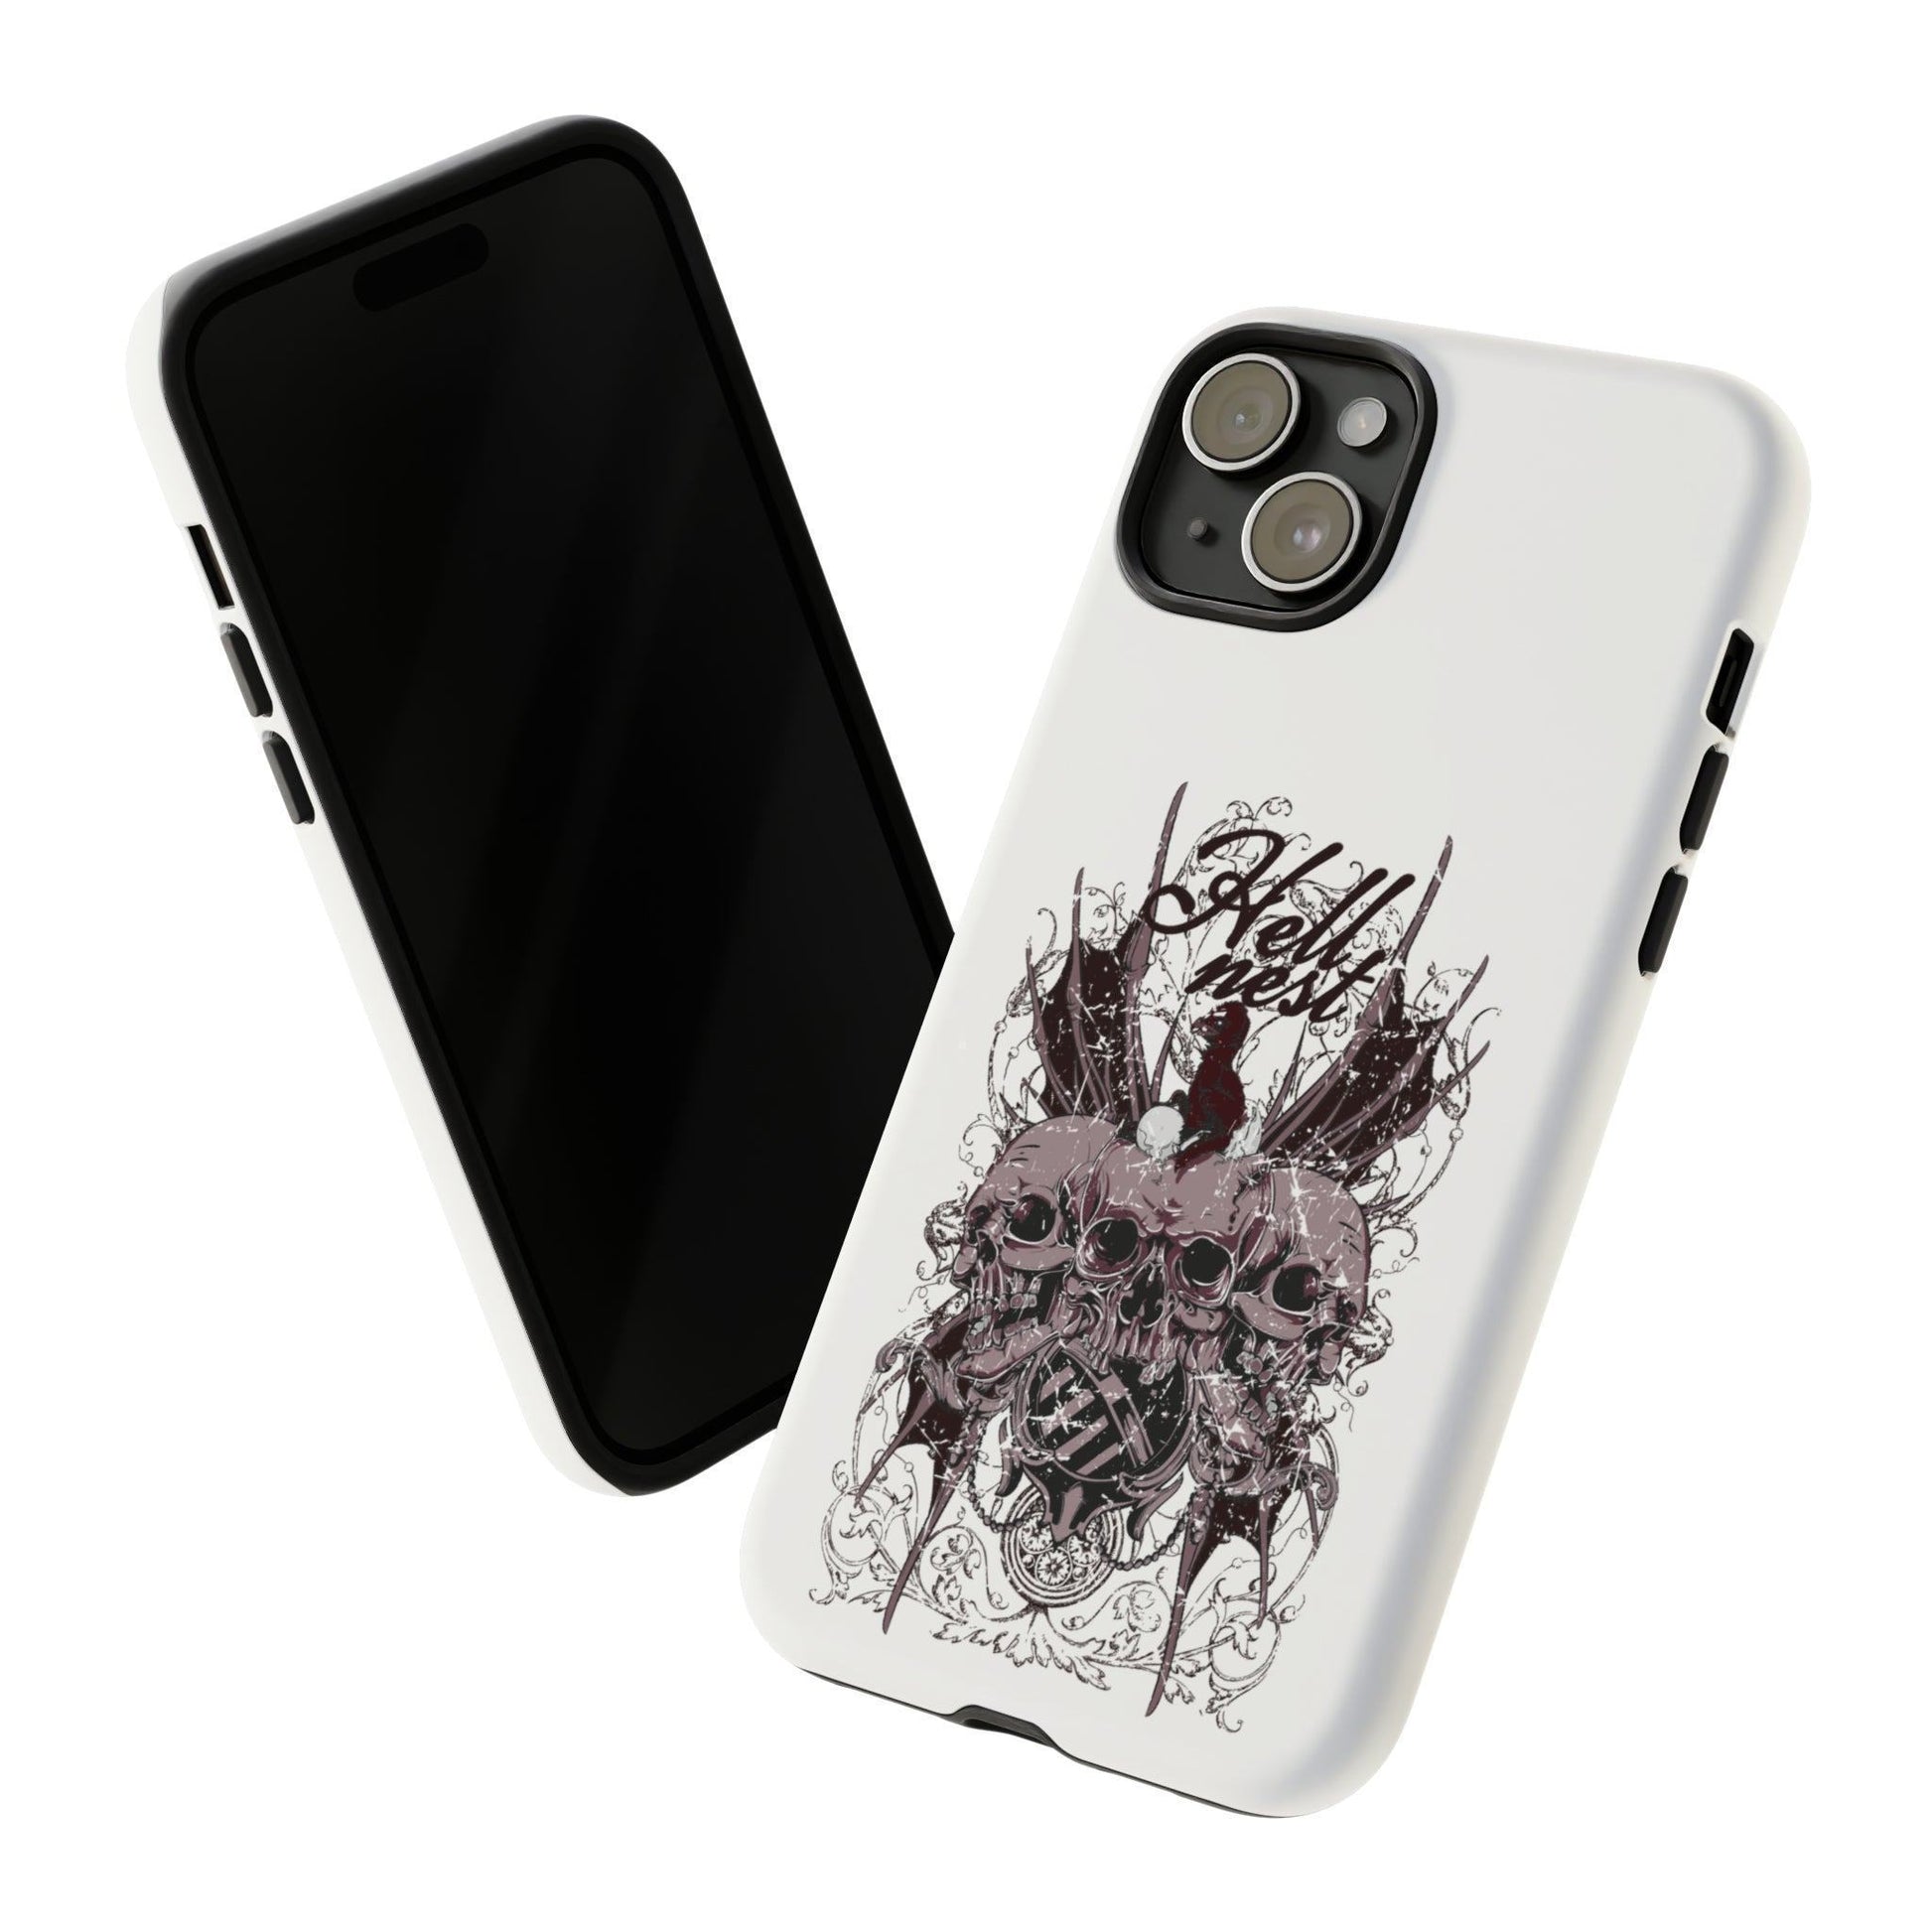 Apple Iphone Hells Nest Cover -- Apple Iphone Hells Nest Cover - undefined Phone Case | JLR Design